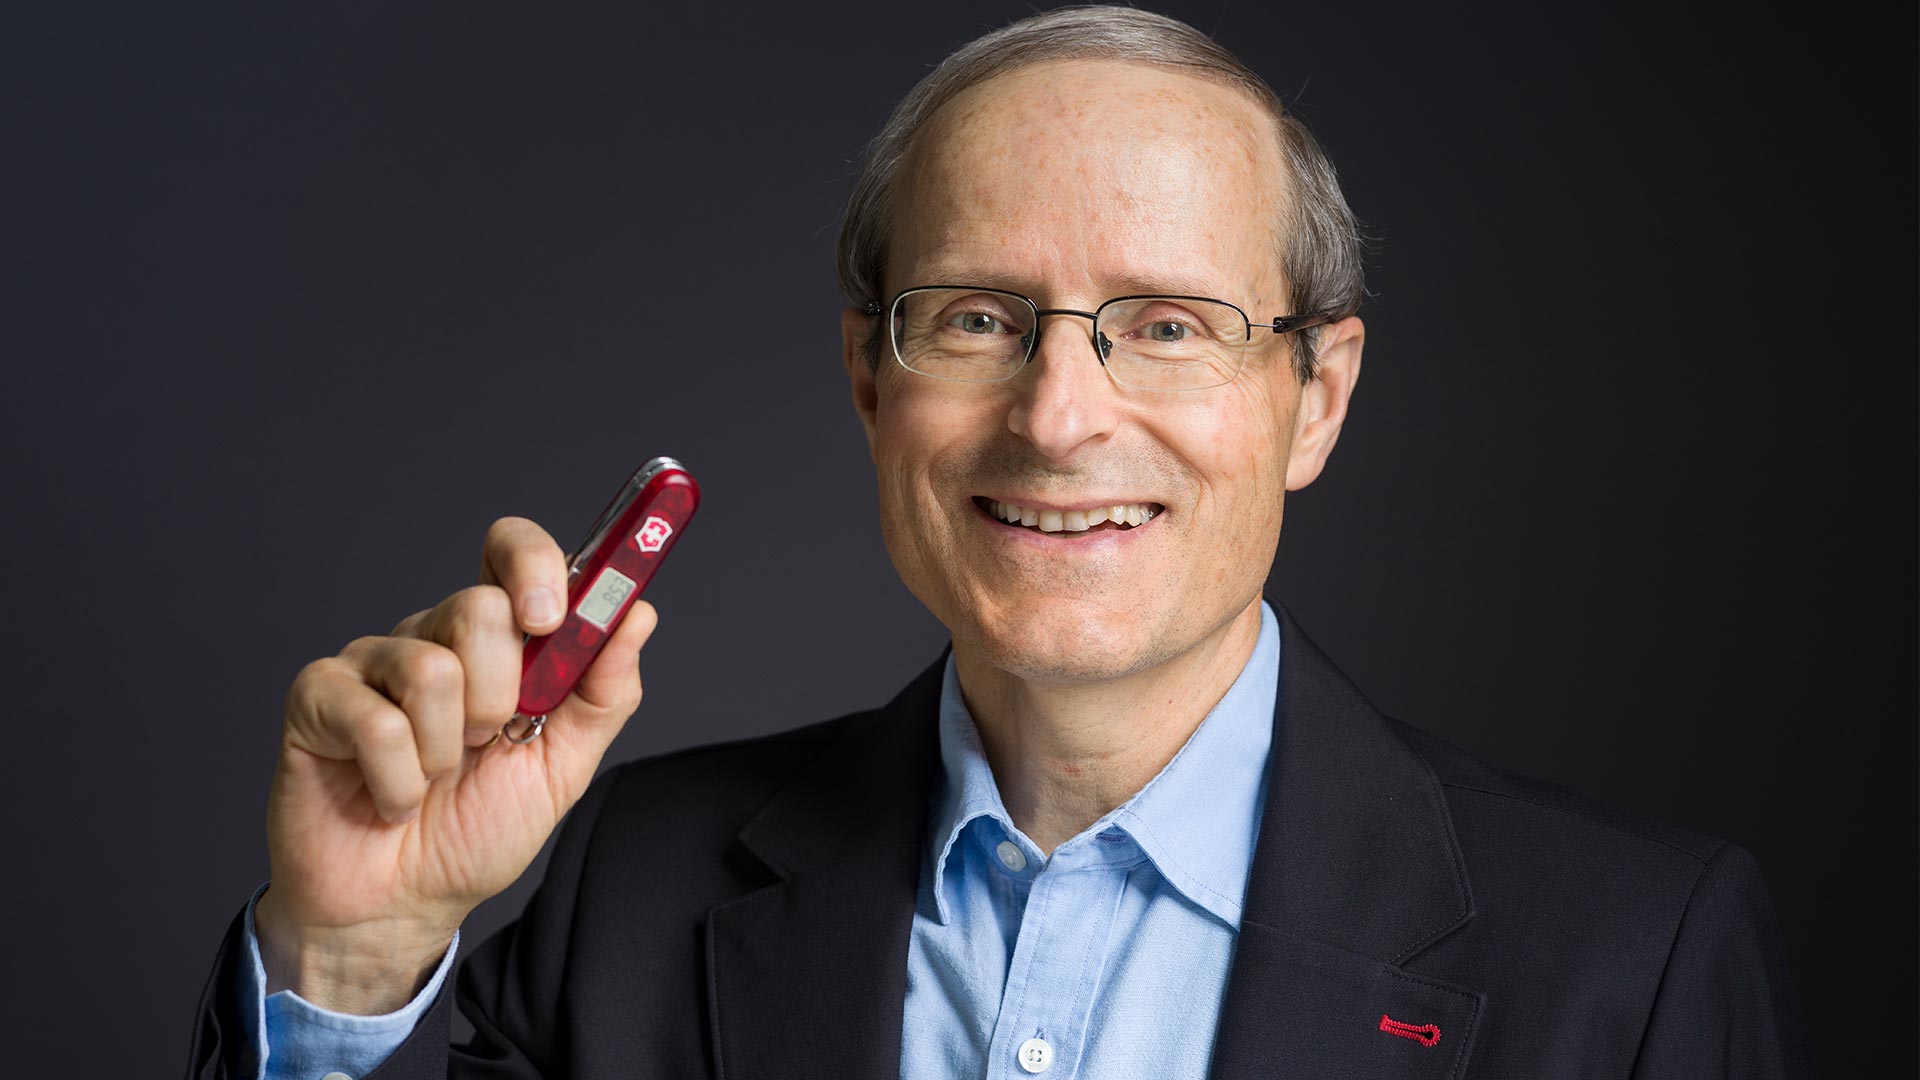 Image of Victorinox CEO Carl Elsener with a pocket knife in his hand.